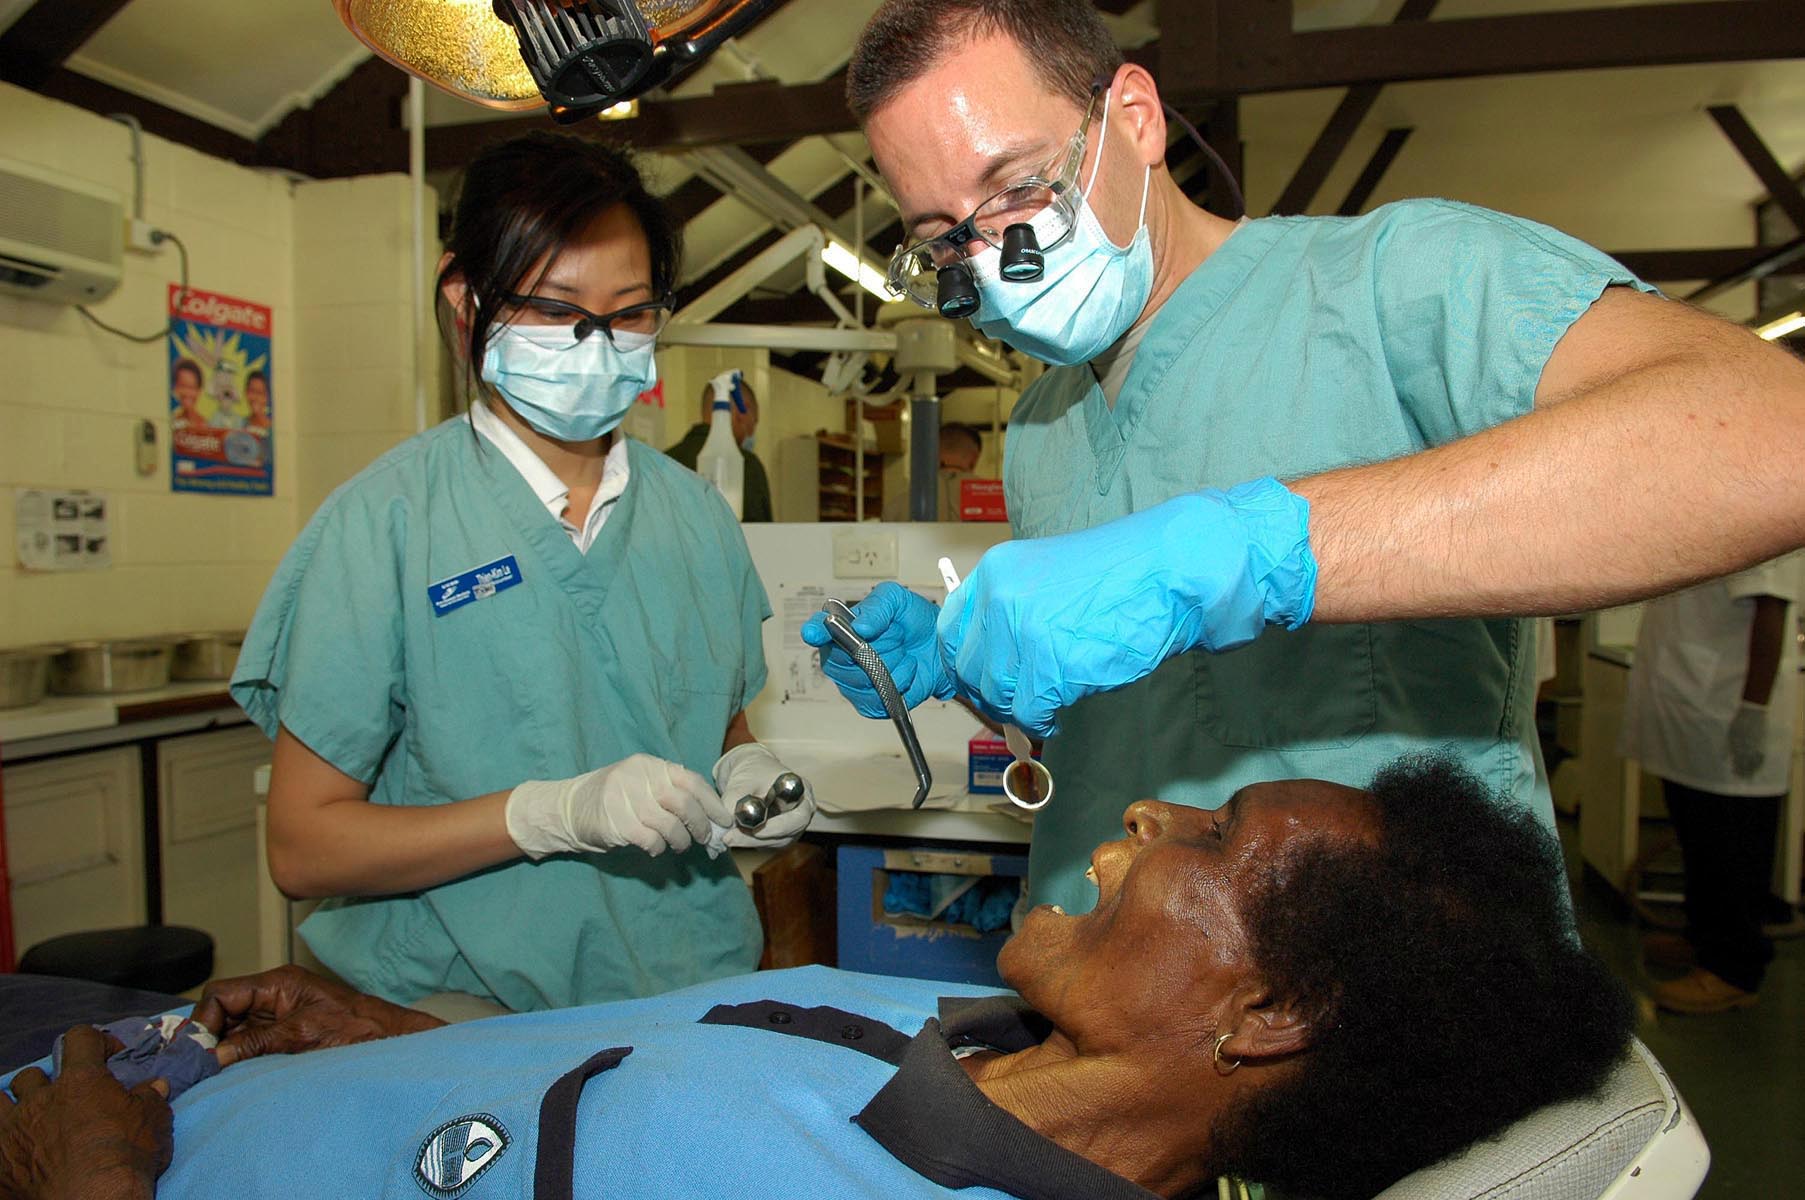 ucsd dental school tuition - CollegeLearners.com